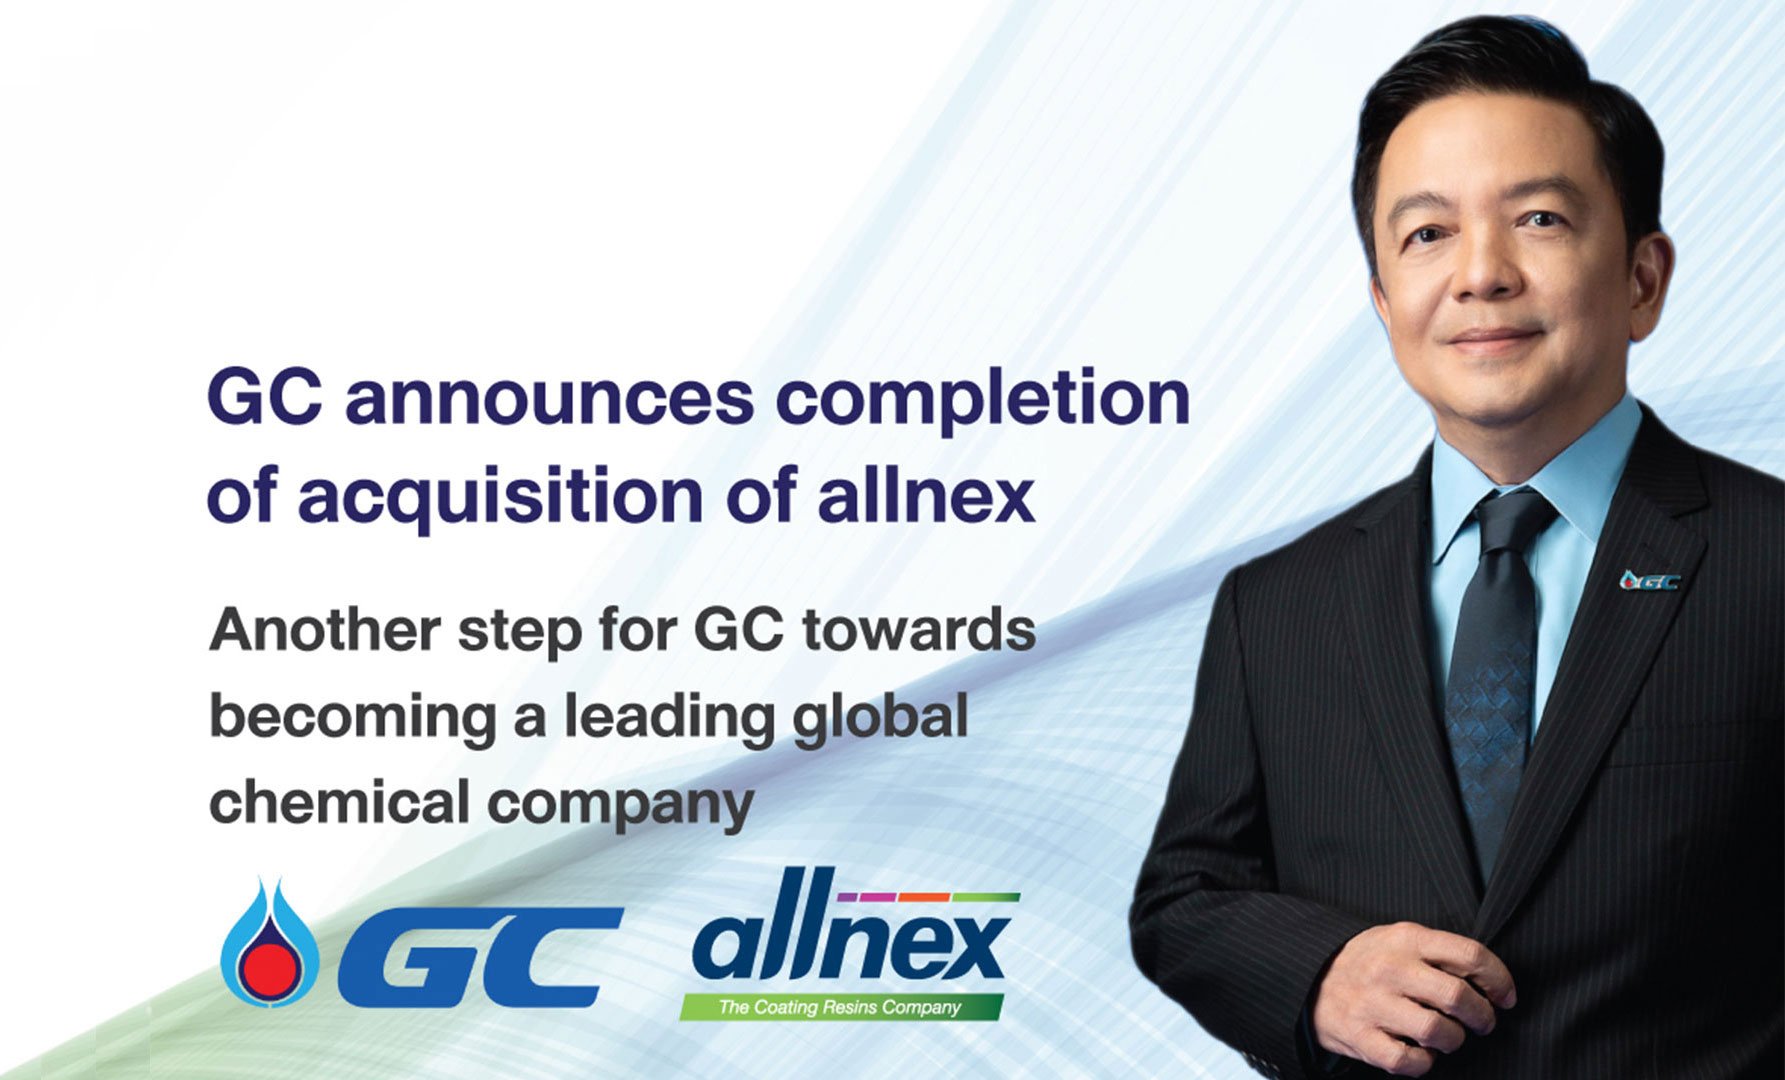 PTTGC International (Netherlands) B.V., subsidiary of GC, announces completion of acquisition of allnex